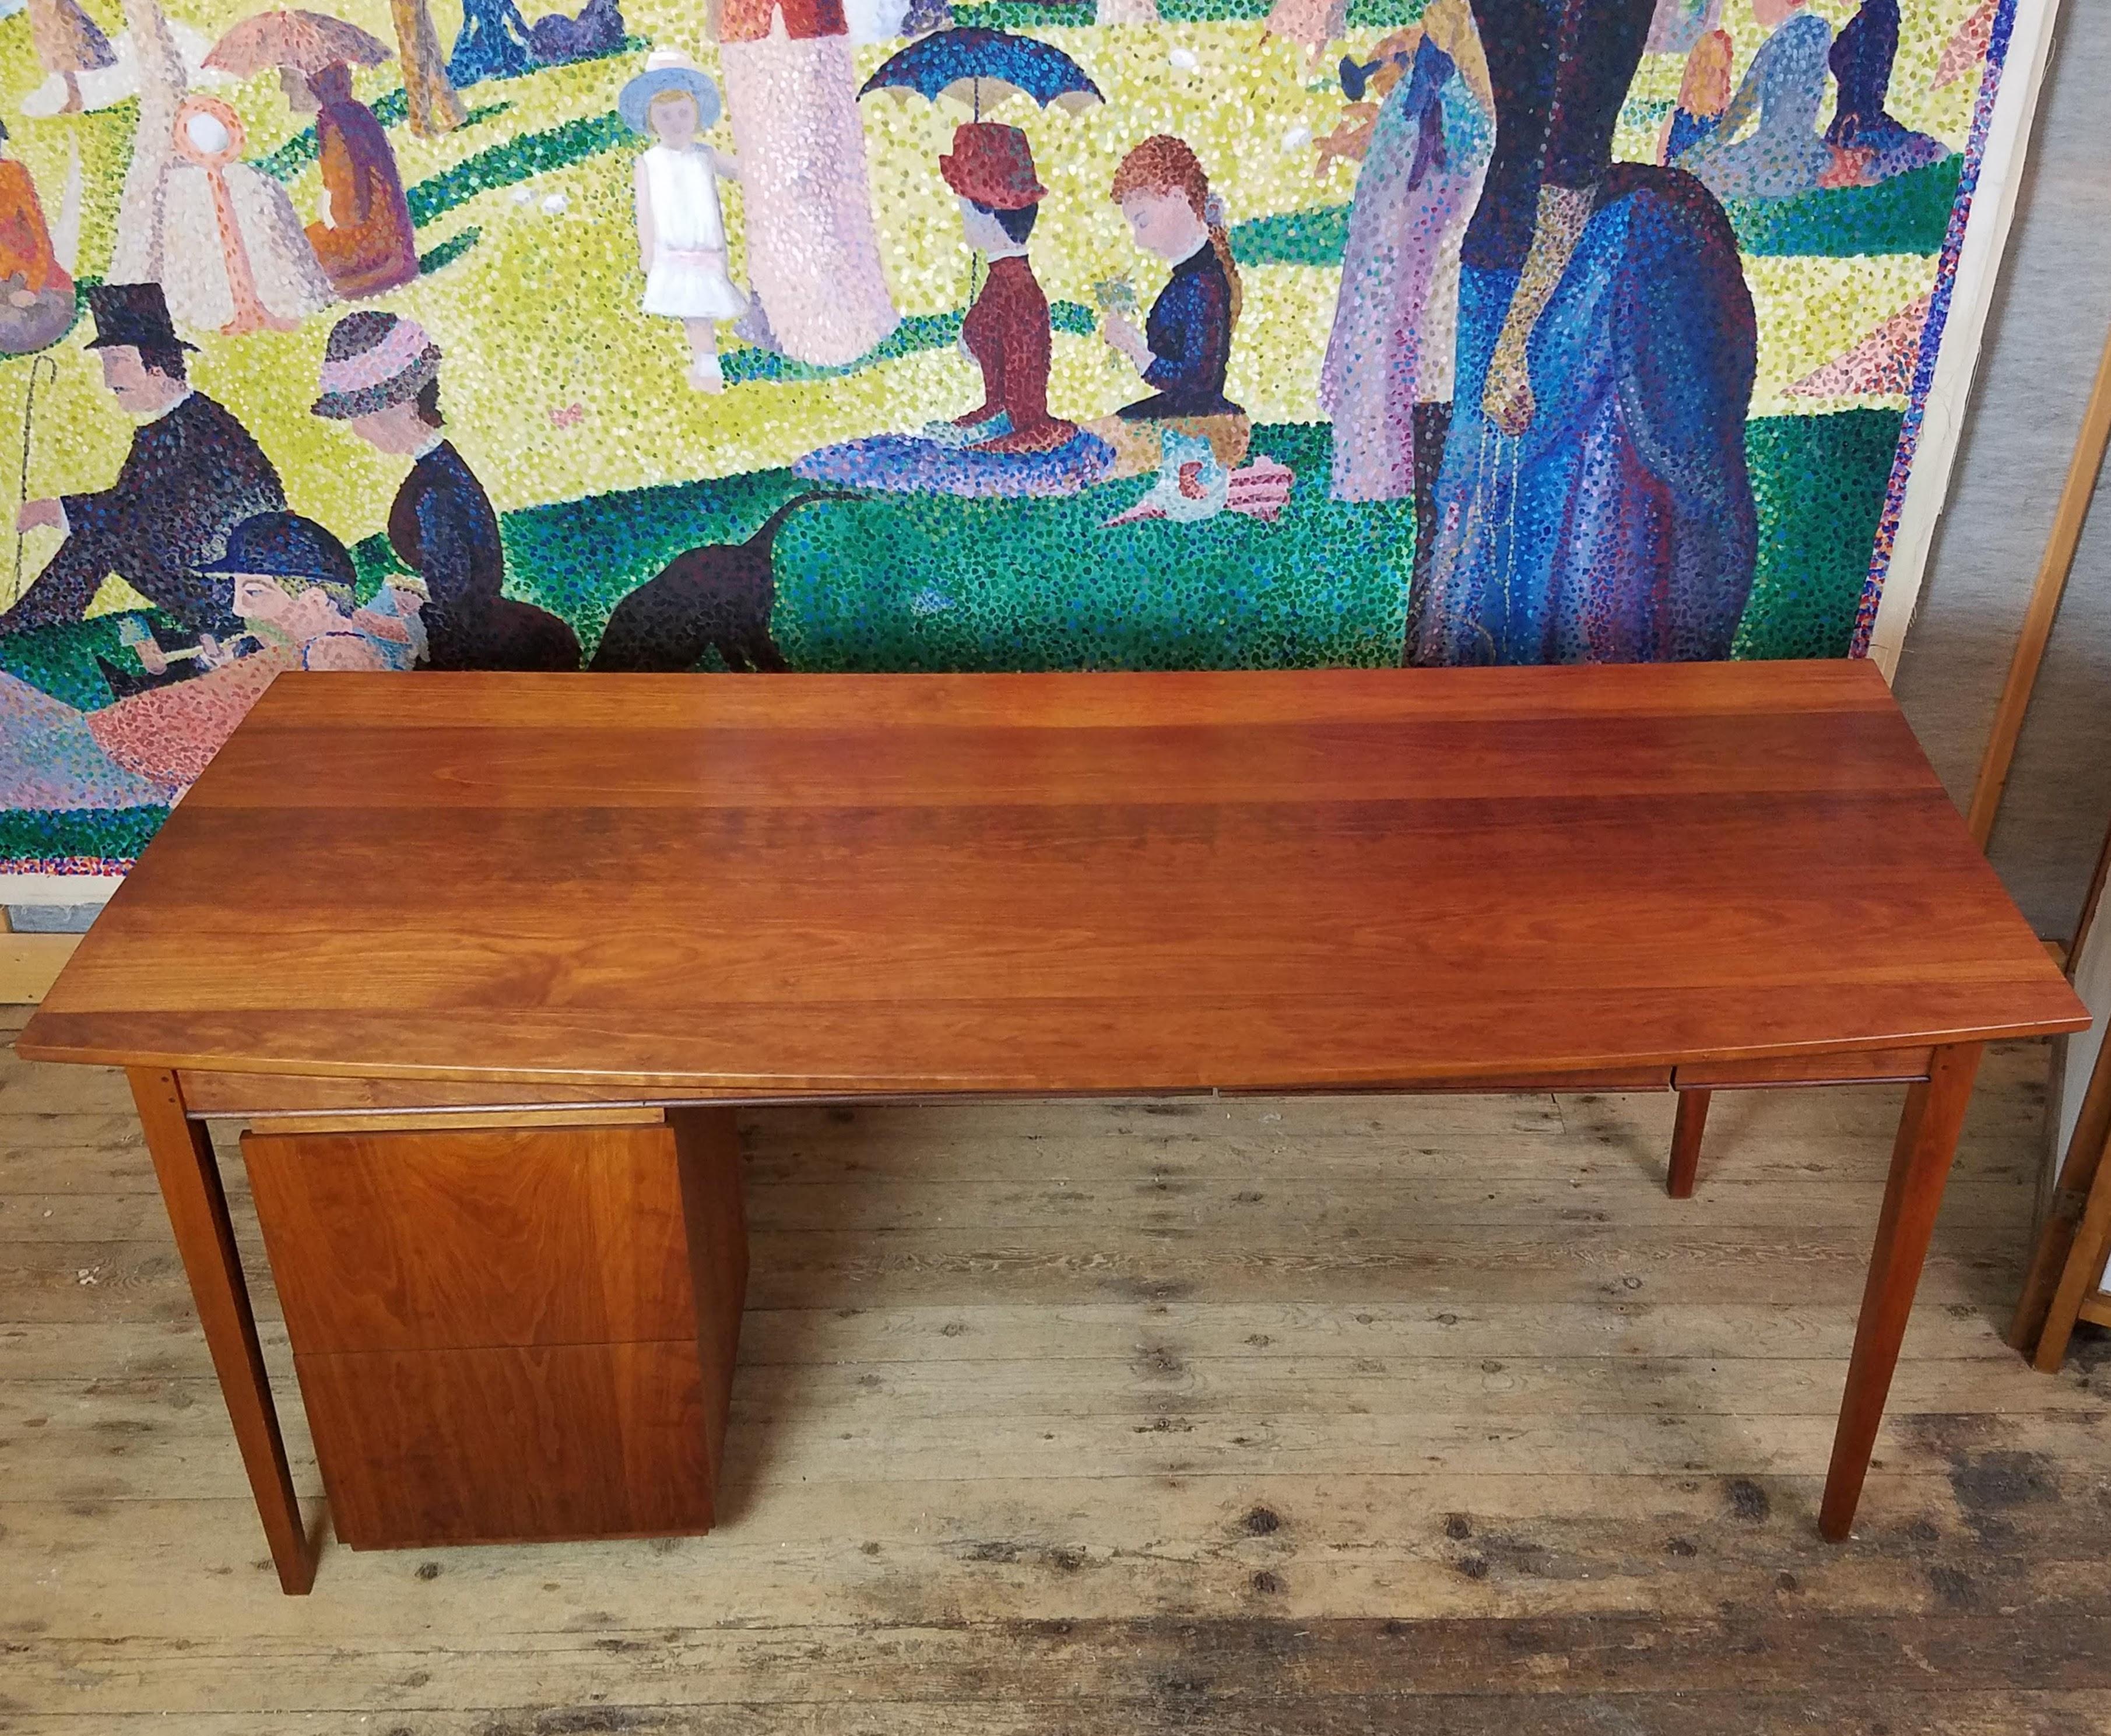 Bowed Front Solid Cherry Desk with Suspended Drawers Maine Studio 1980s For Sale 4